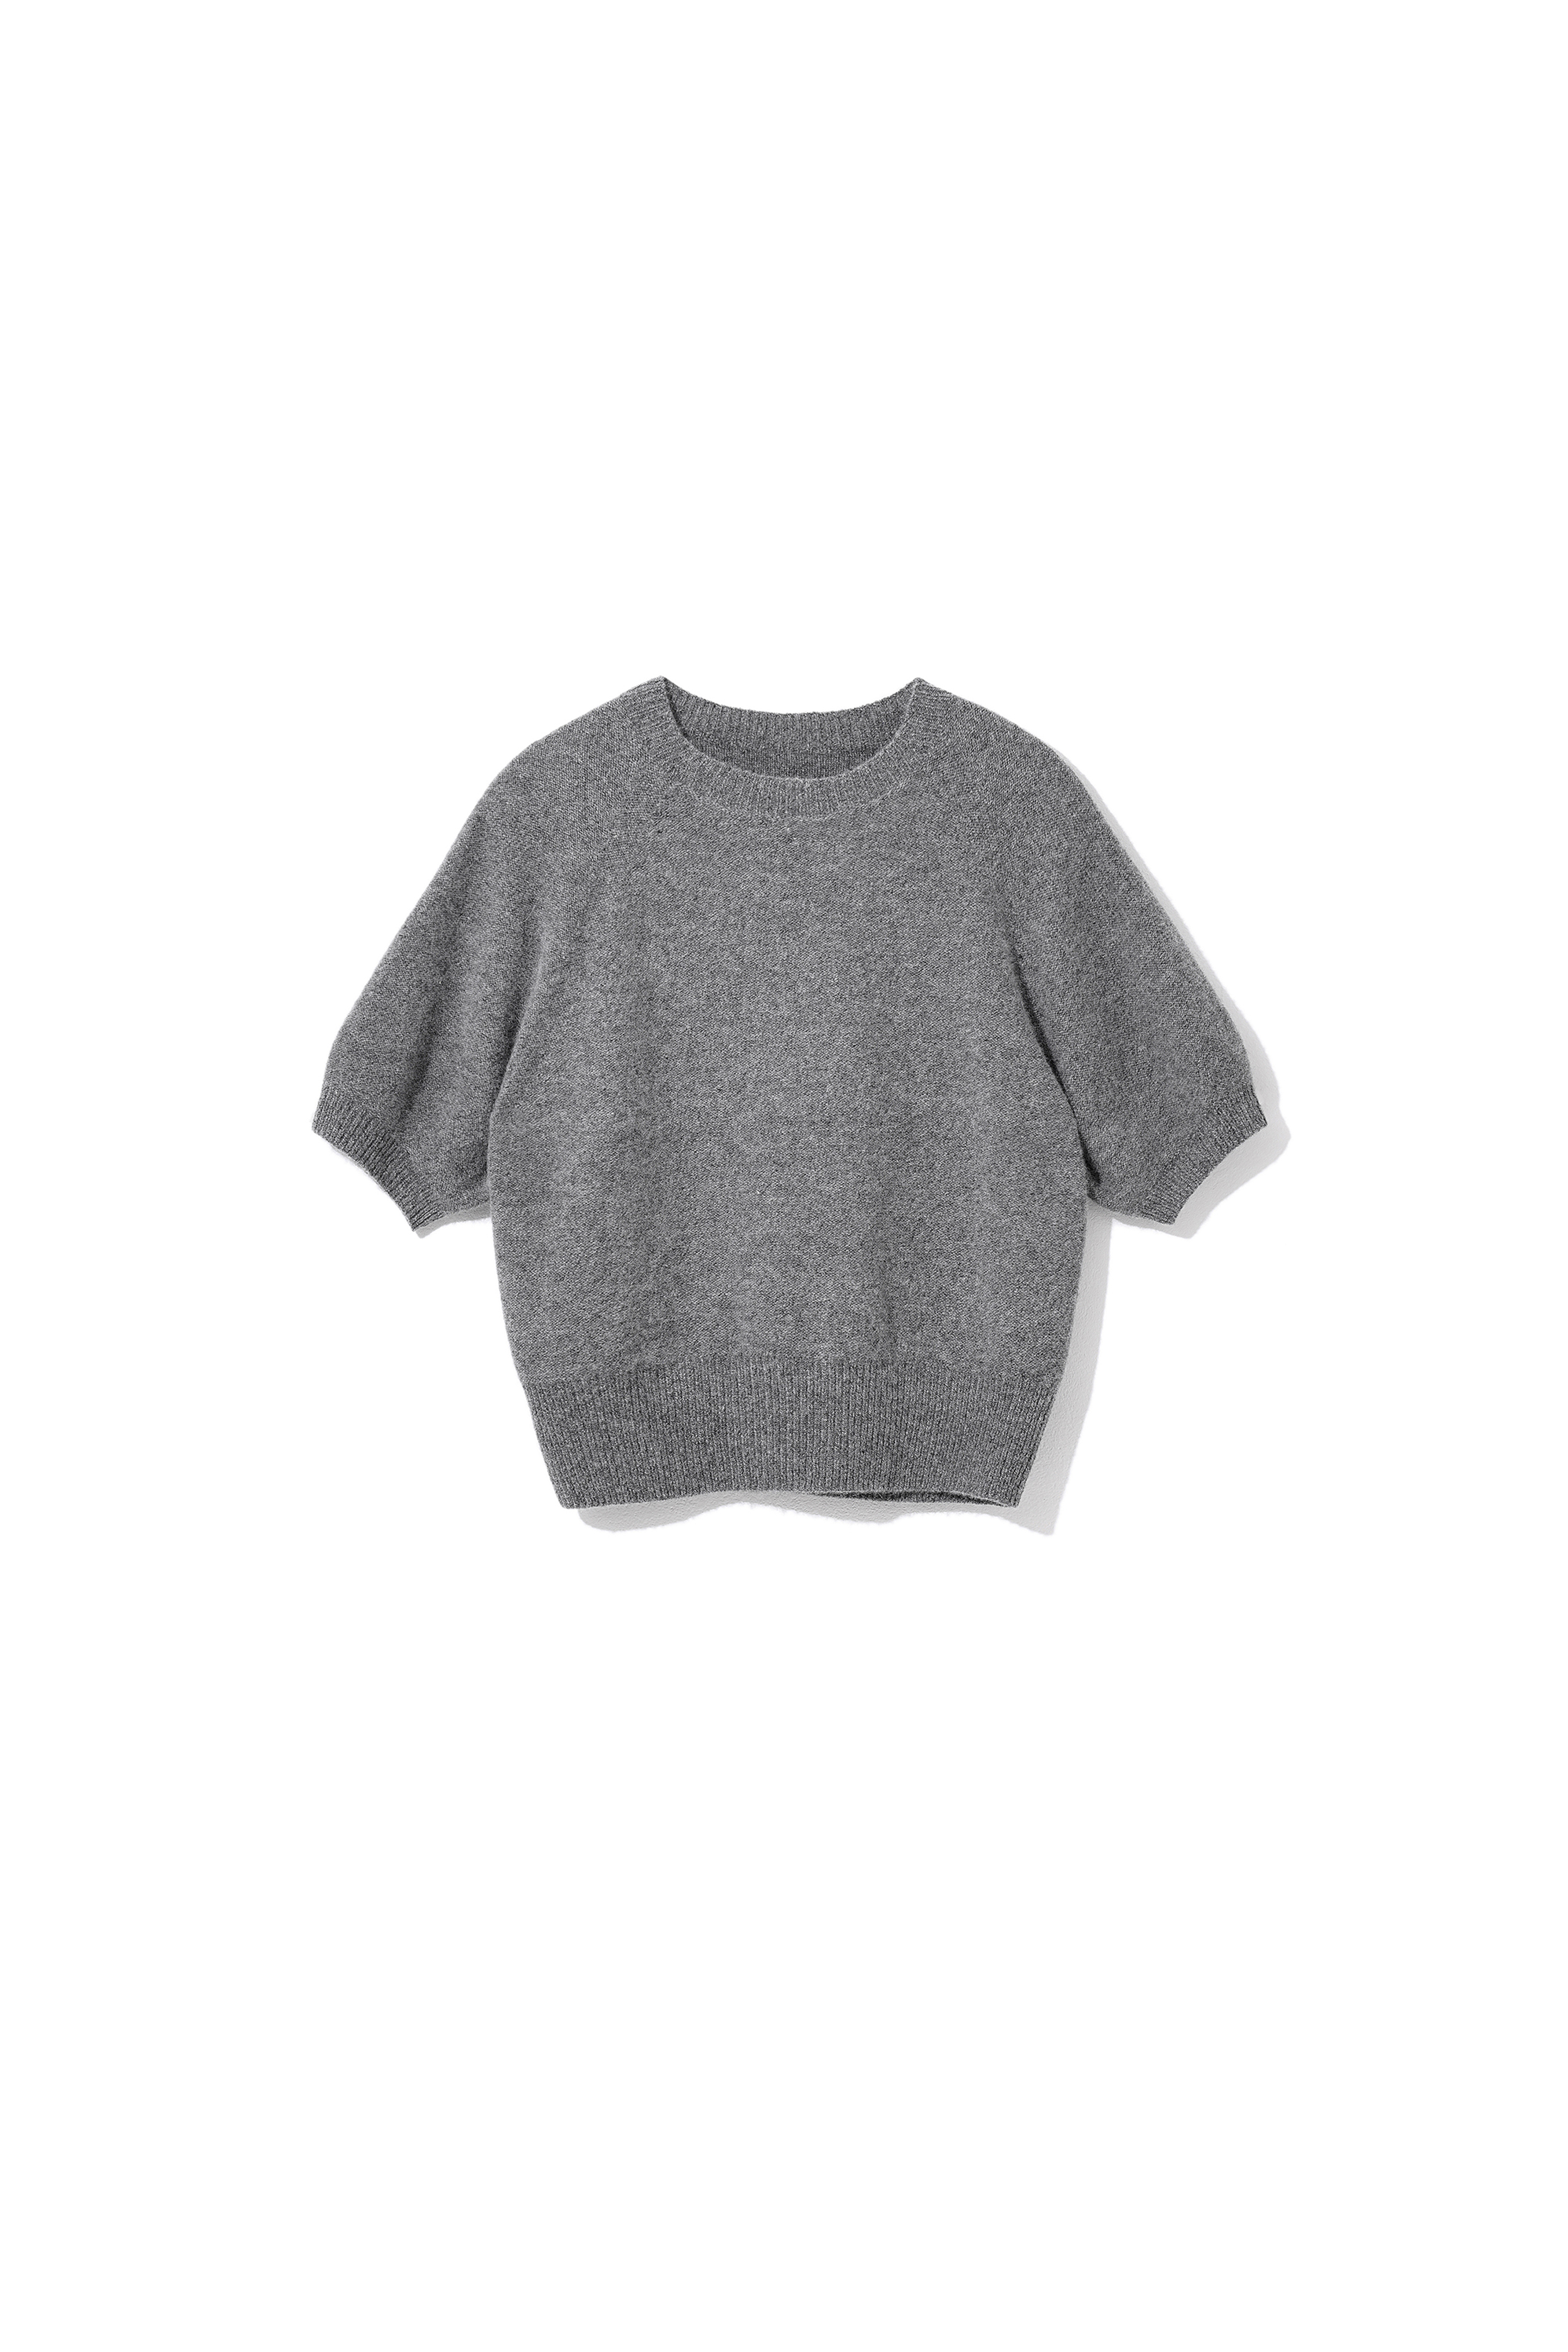 2nd) Mong Puff Sleeve Knitted P/O Grey